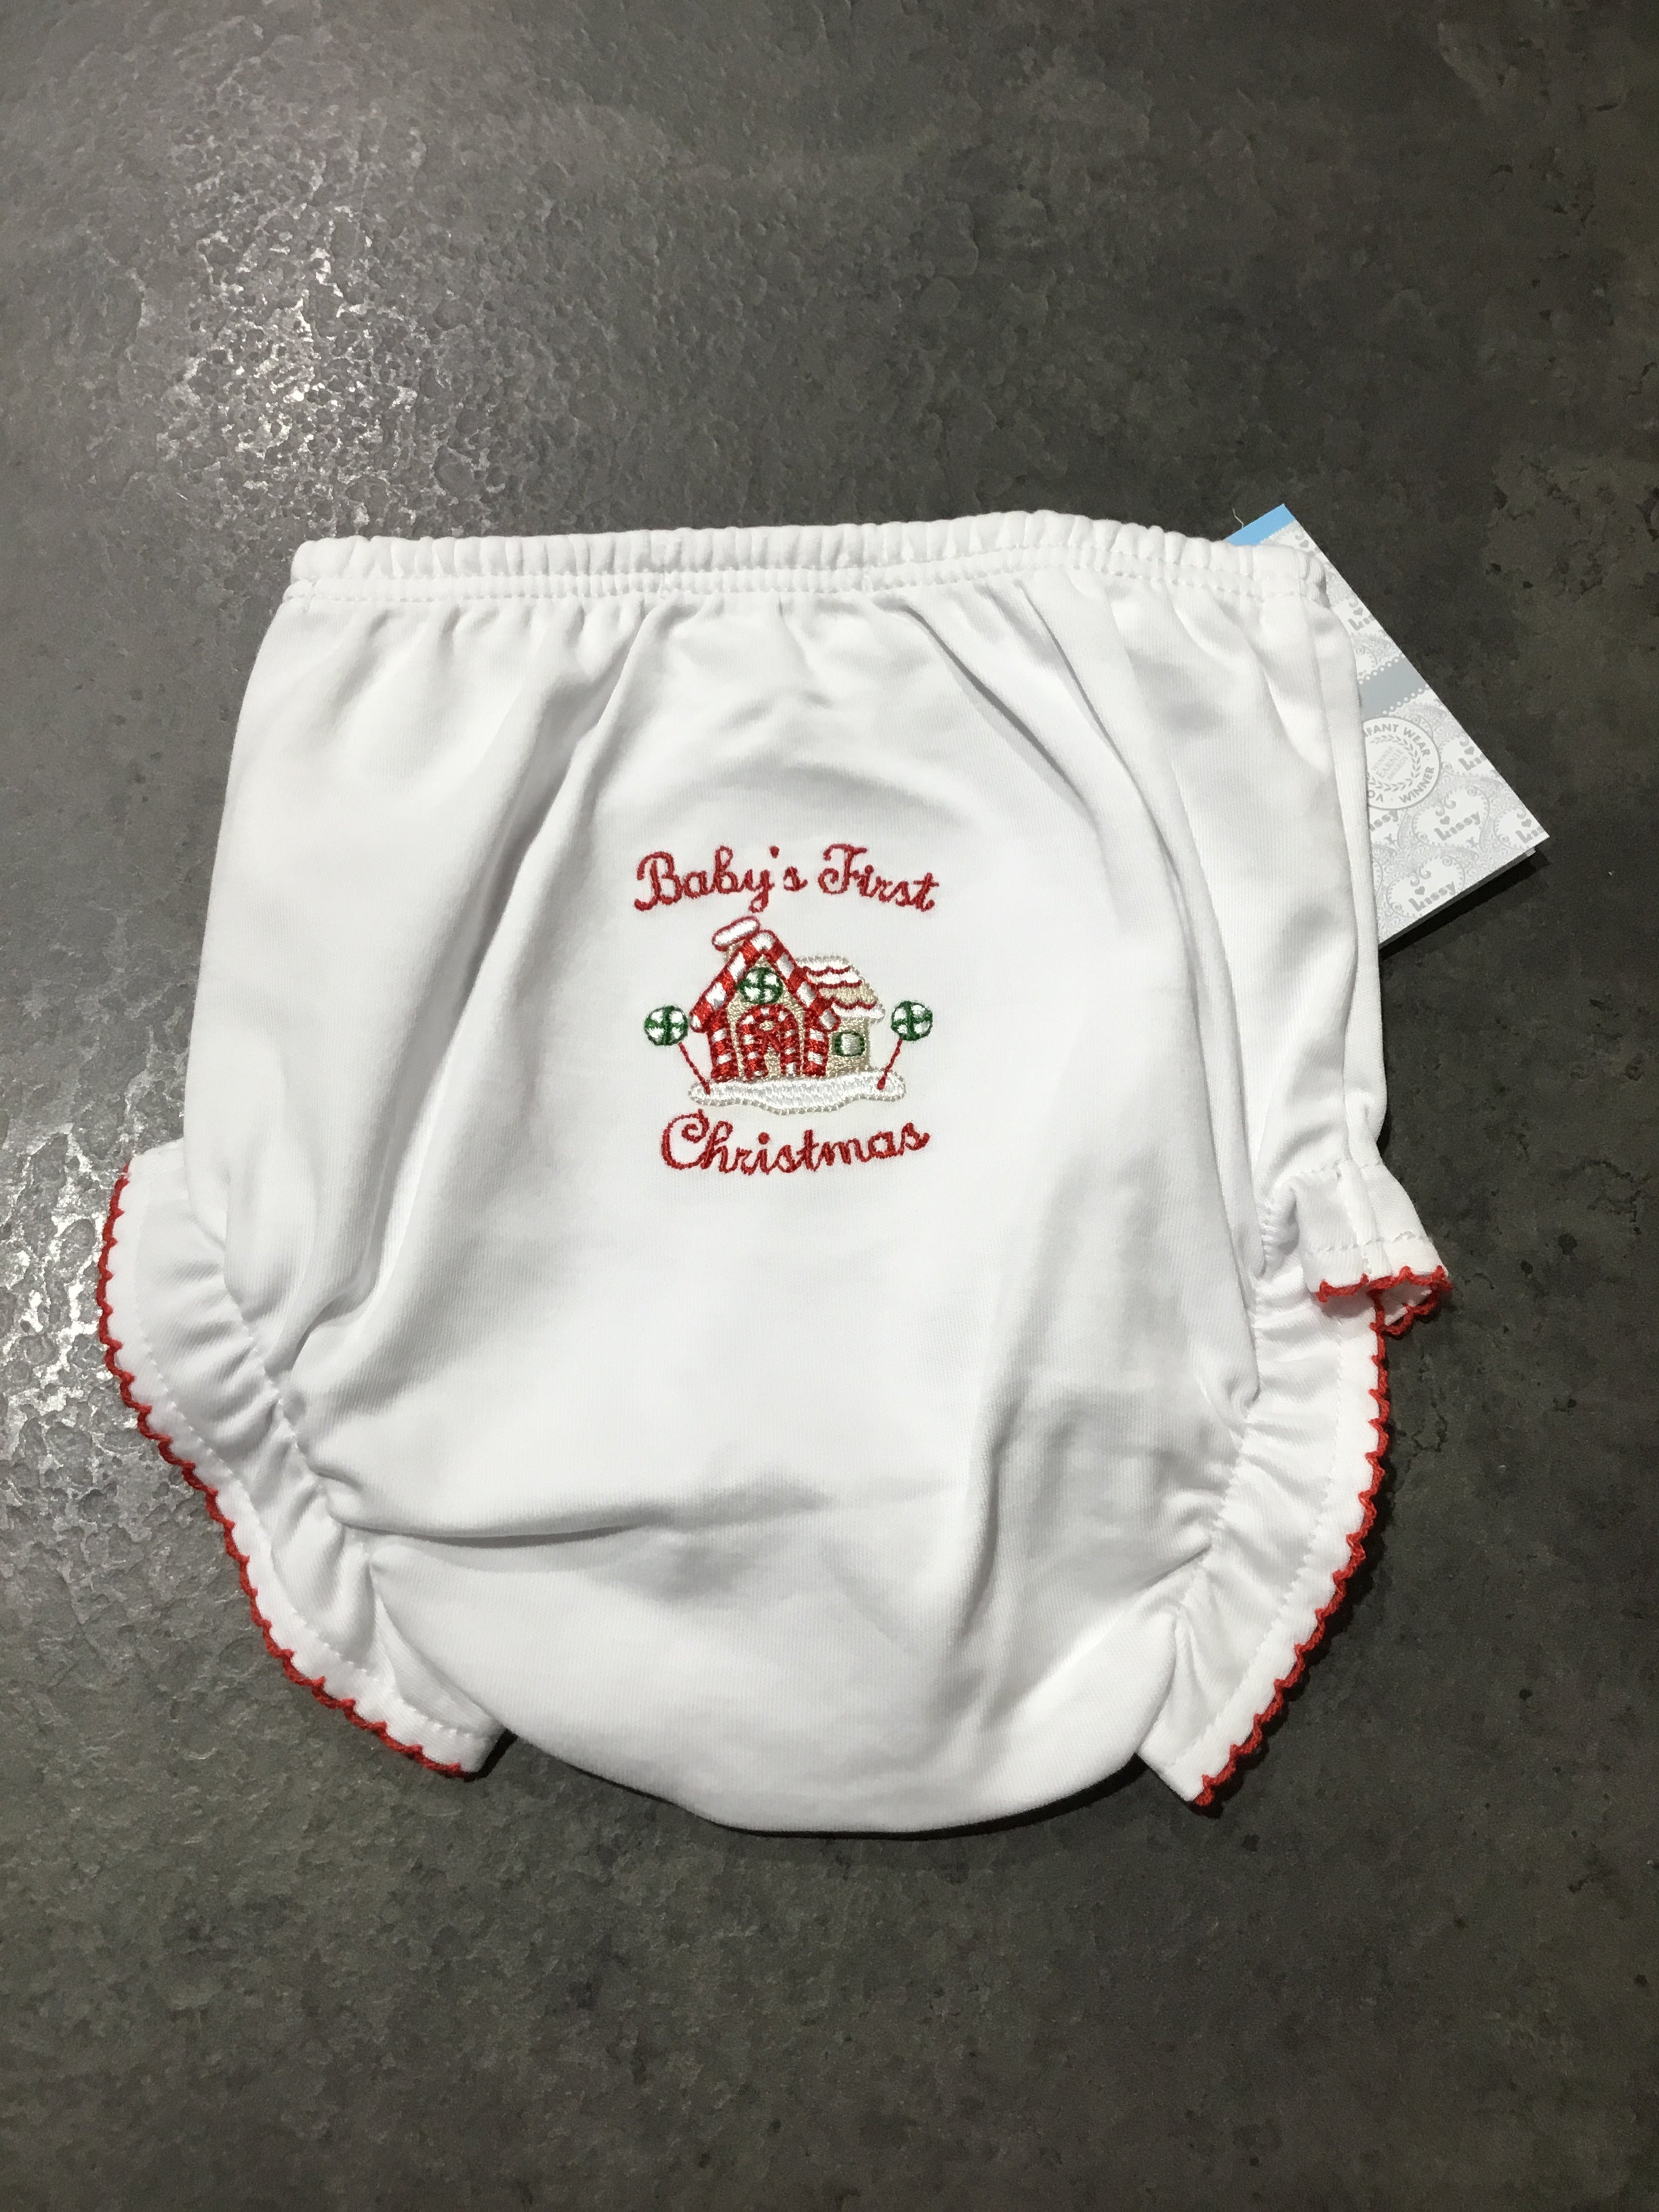 Baby’s 1st Christmas Diaper Cover